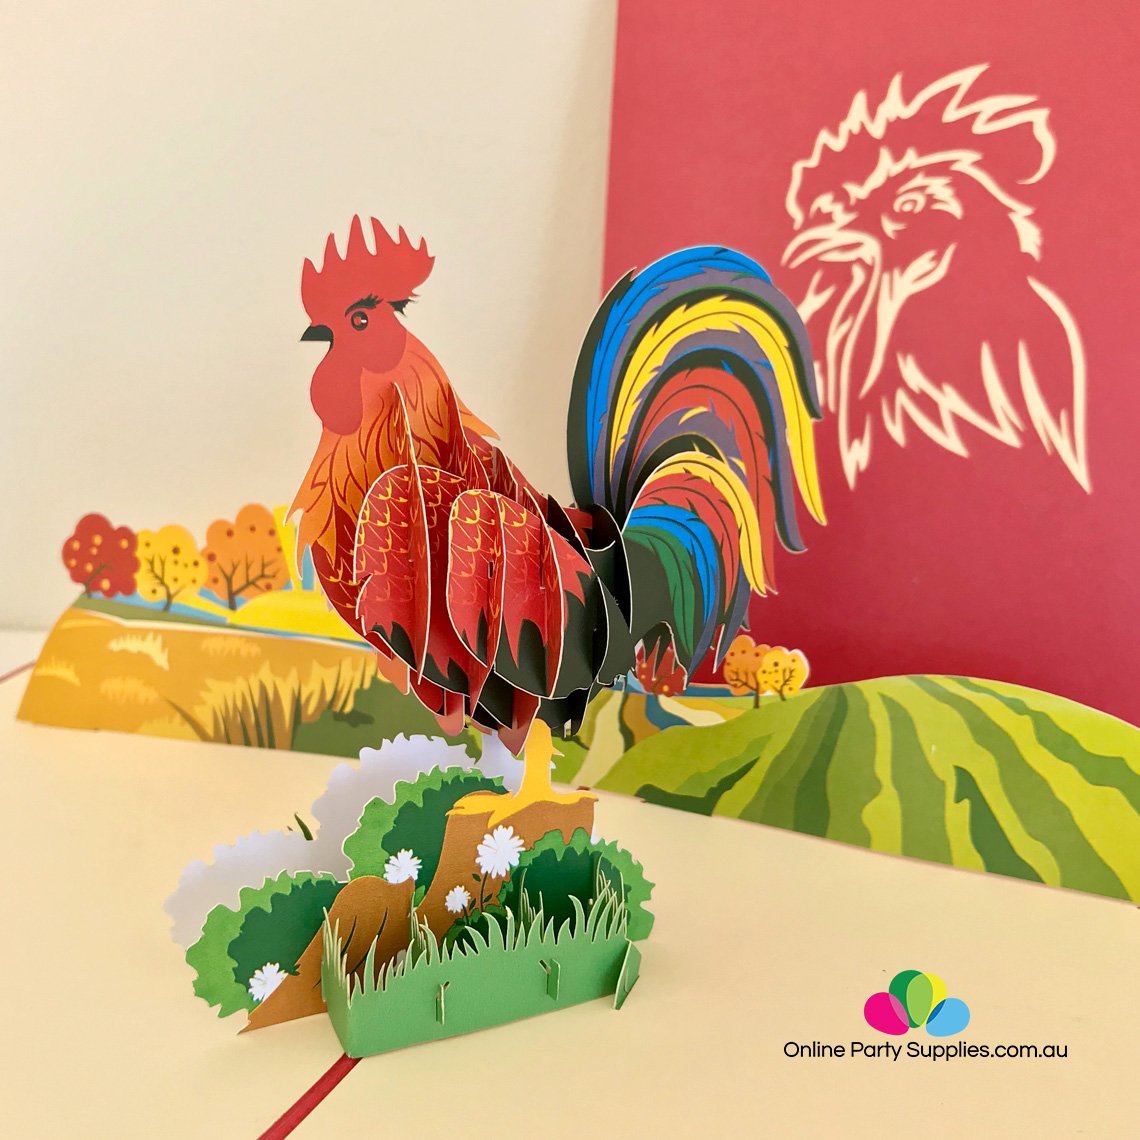 Handmade Colourful Rooster 3D Pop Up Greeting Card - Online Party Supplies